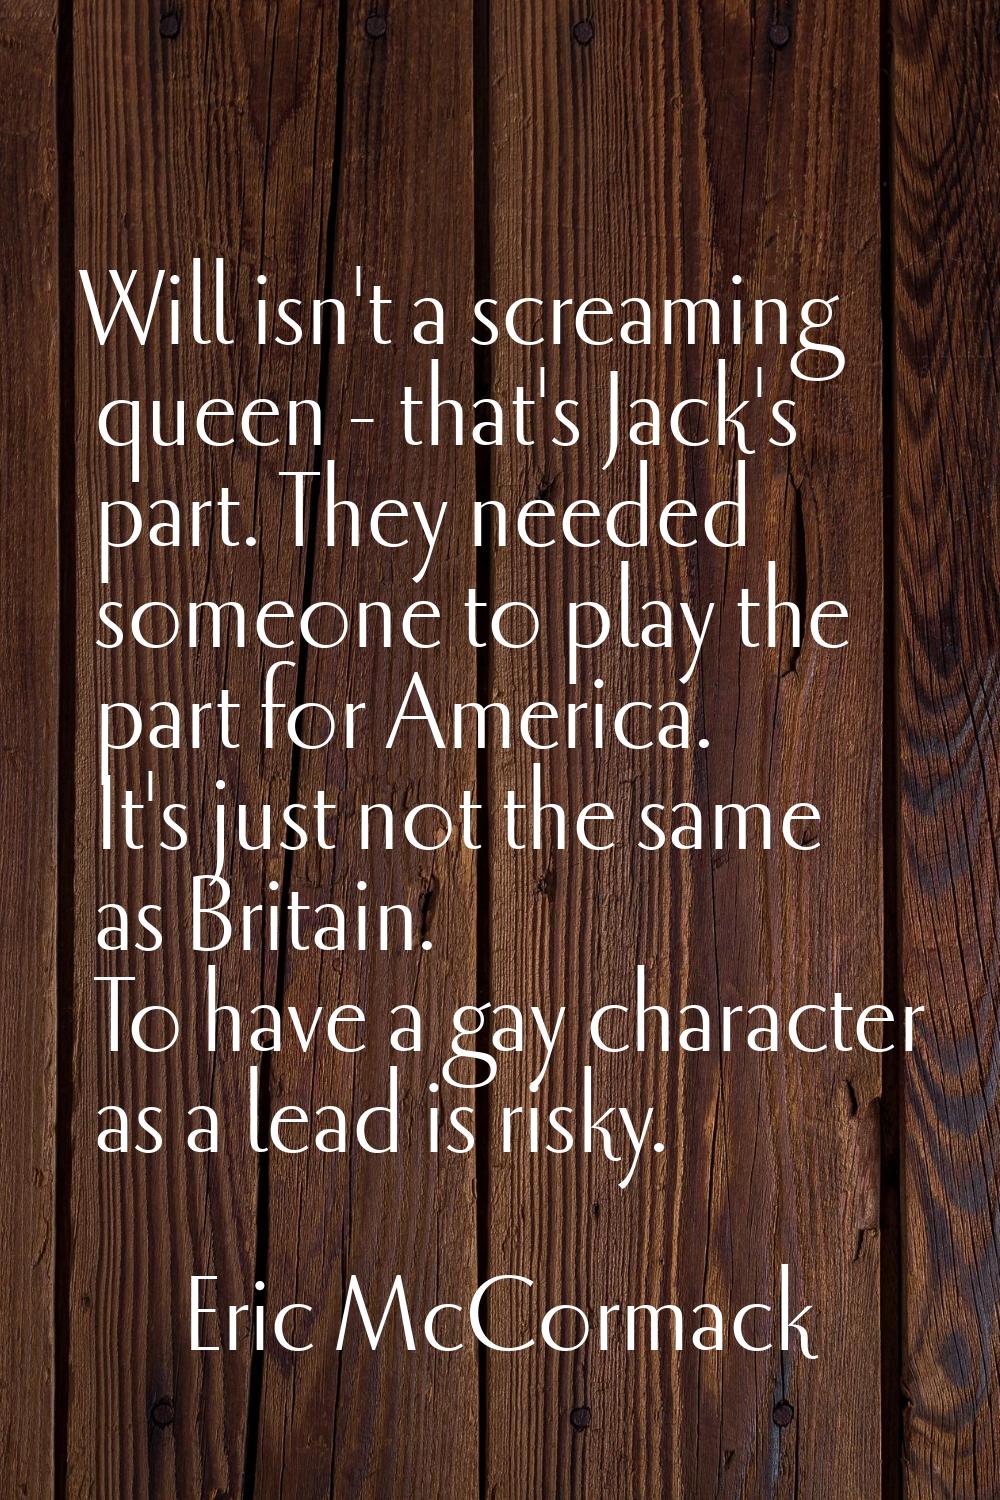 Will isn't a screaming queen - that's Jack's part. They needed someone to play the part for America